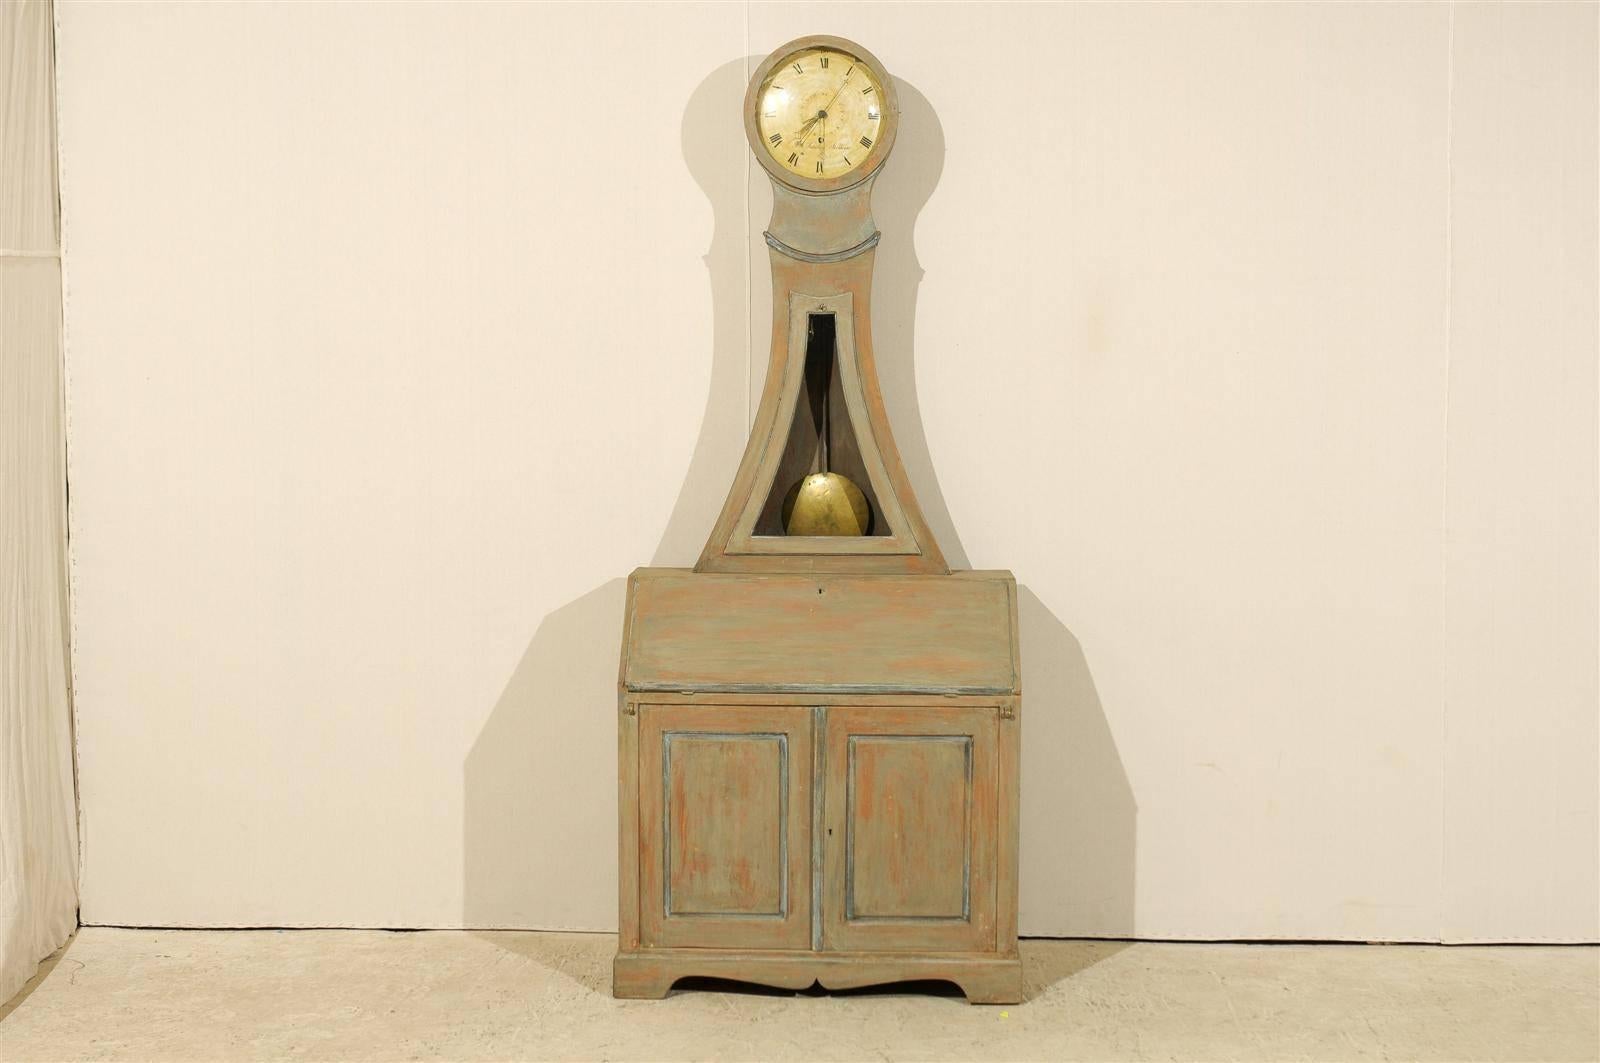 A 19th century Swedish painted wood clock cabinet with slant front desk, circa 1830. The upper clock portion of the piece curves down on both sides, creating a pleasing triangular shape, opening up with a key. The clock portion features a large